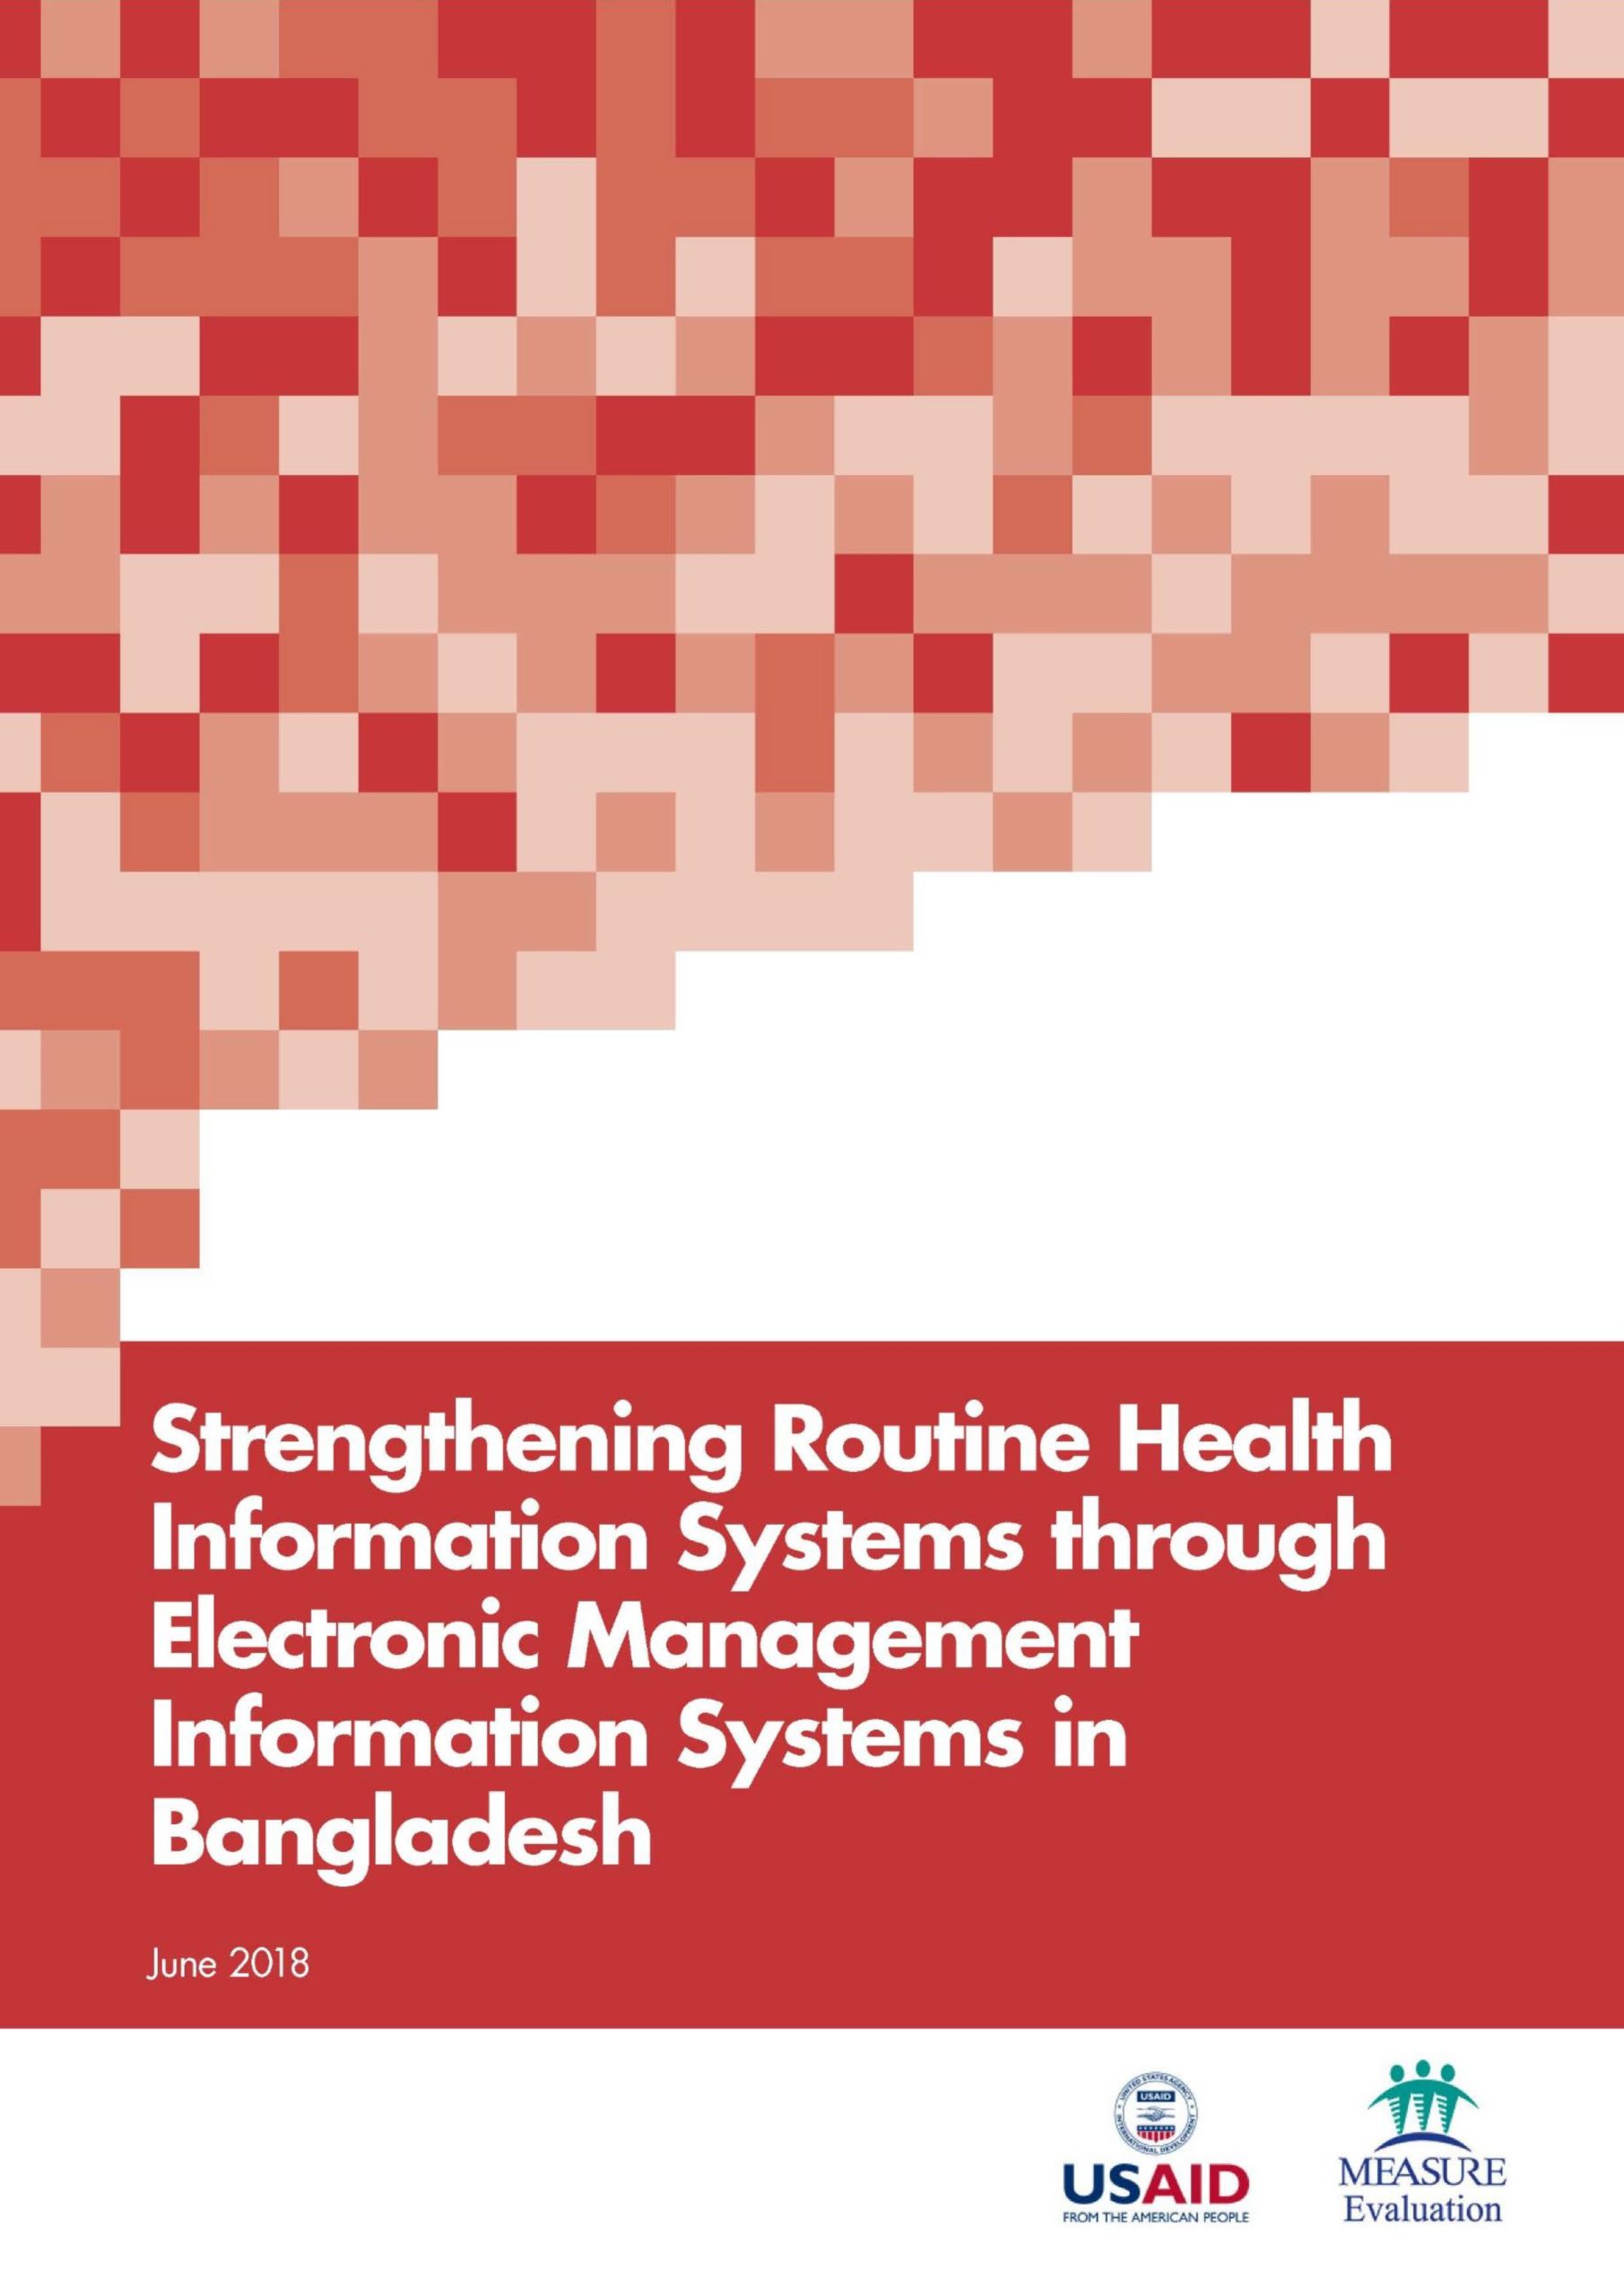 Strengthening Routine Health Information Systems through Electronic Management Systems in Bangladesh